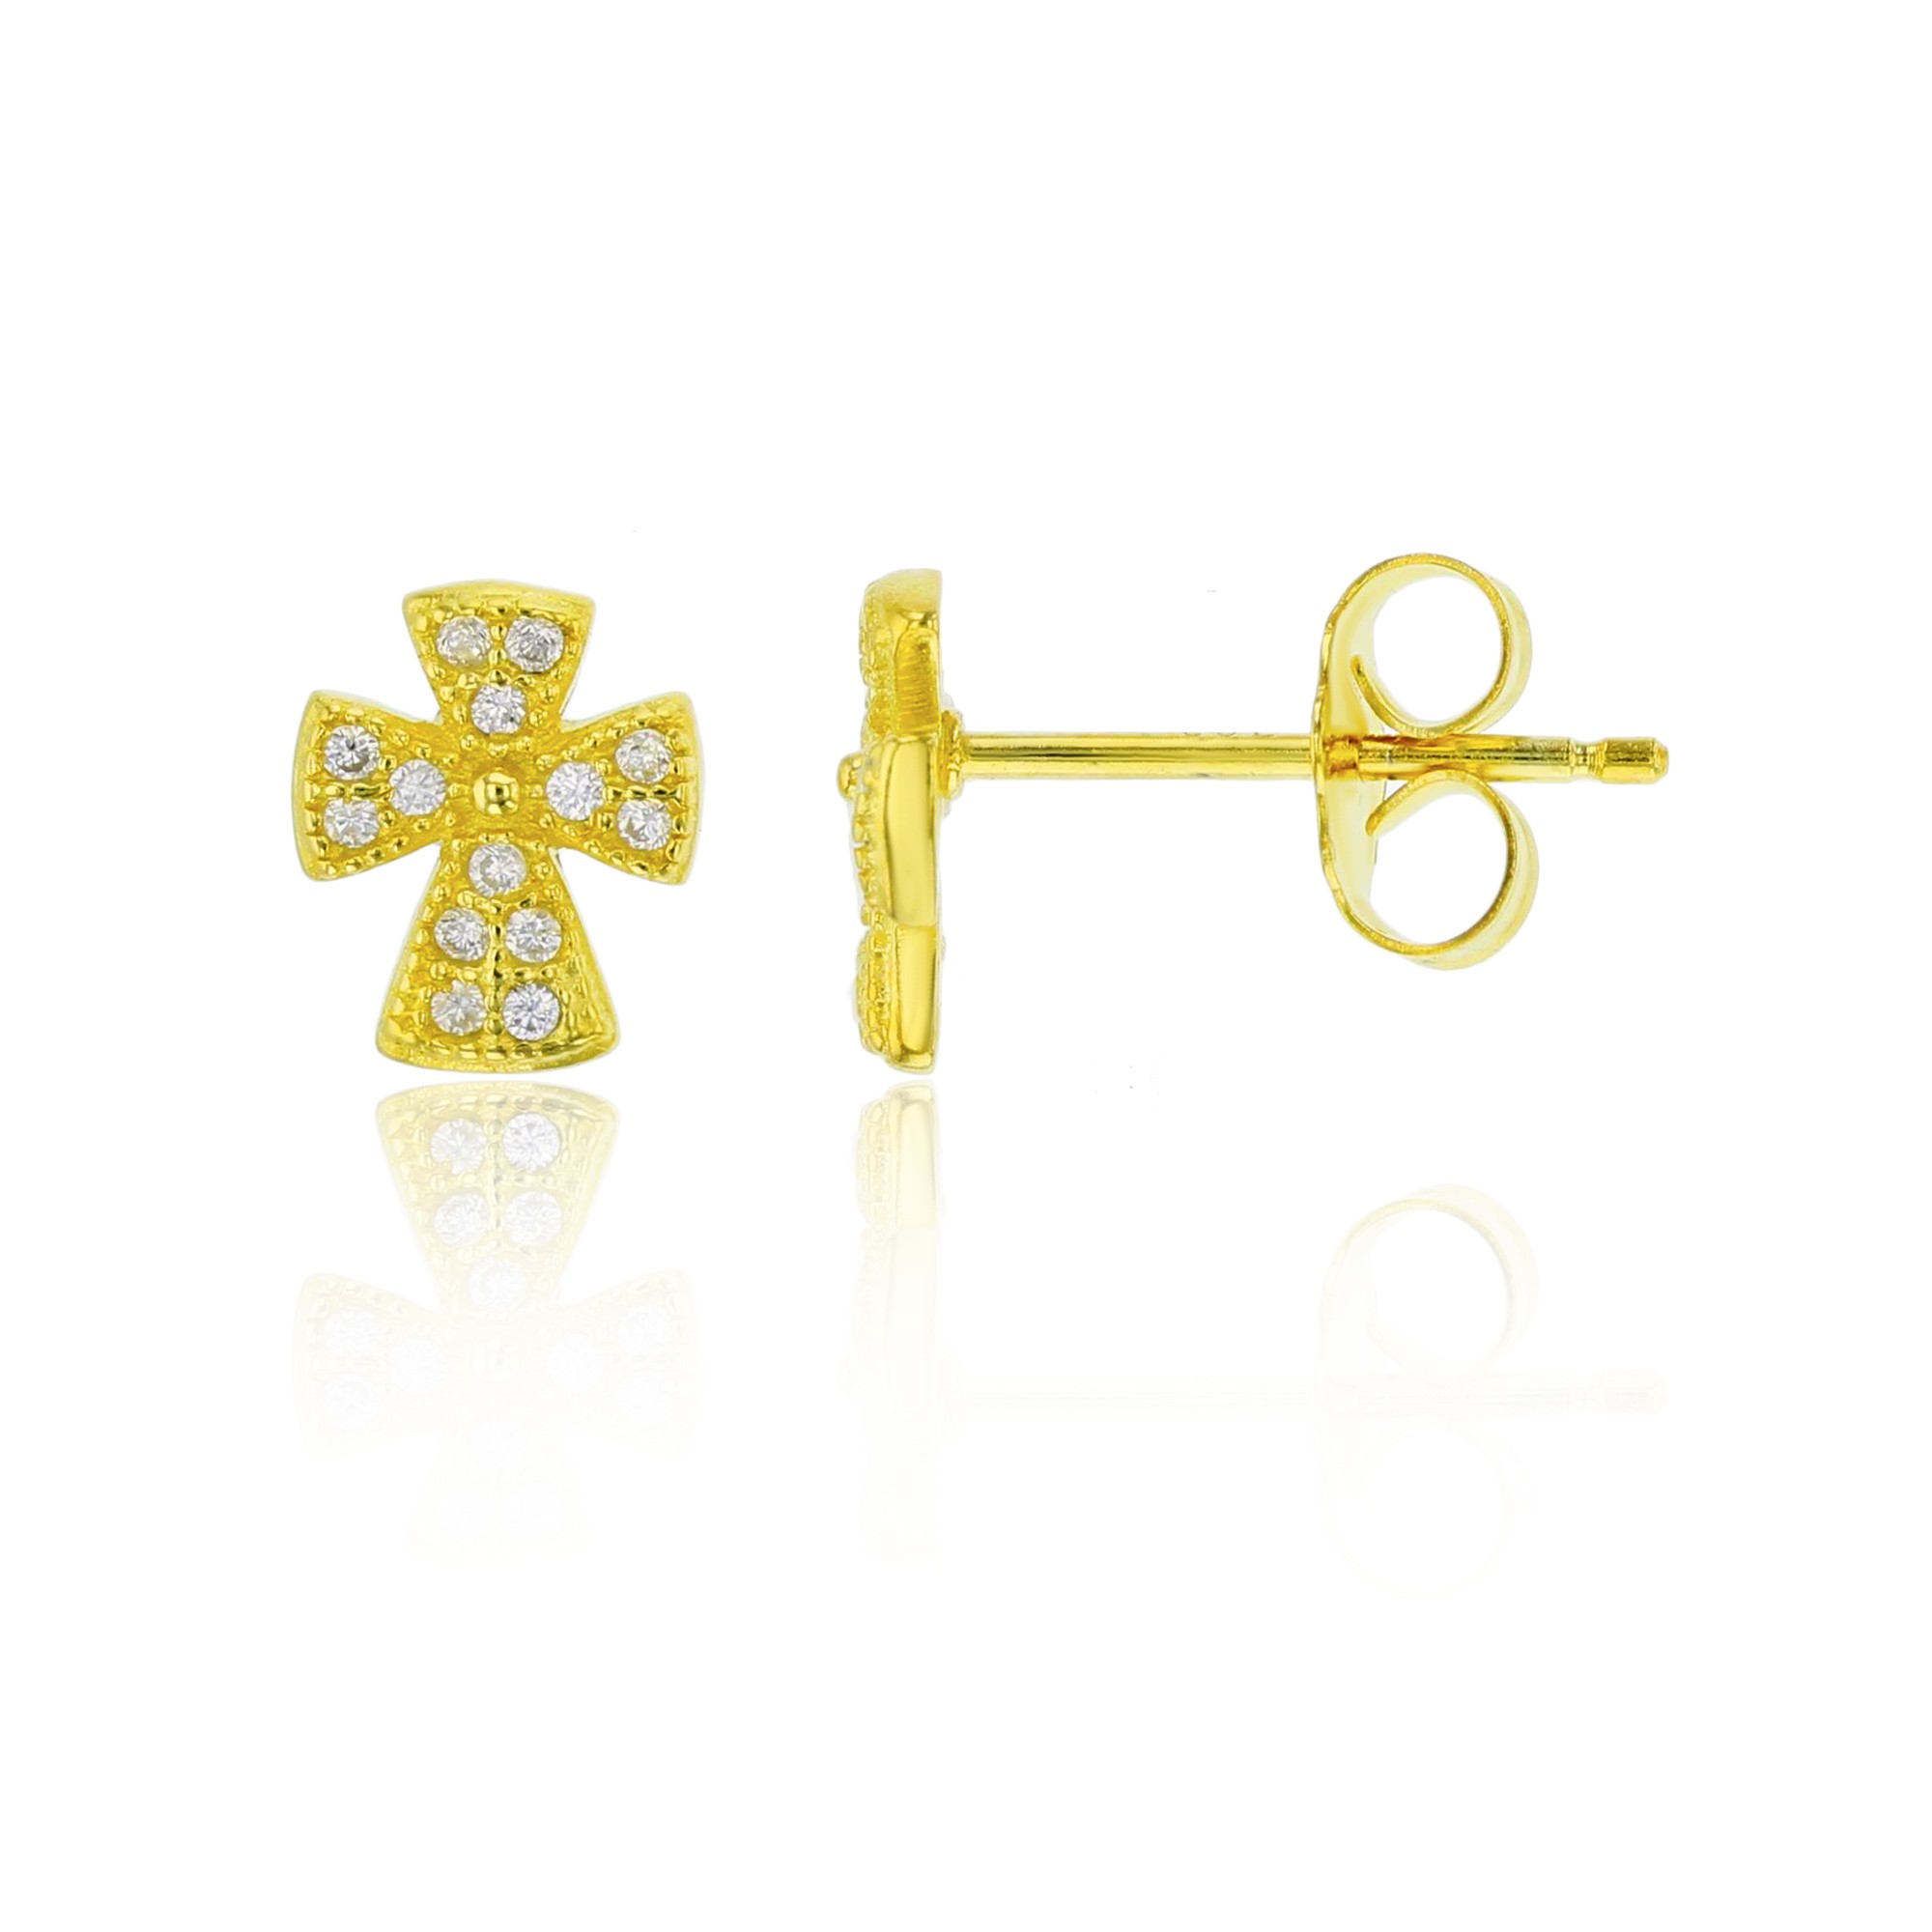 925 Sterling Silver Gold Tone Cross Stud Earrings With Cubic Zirconia